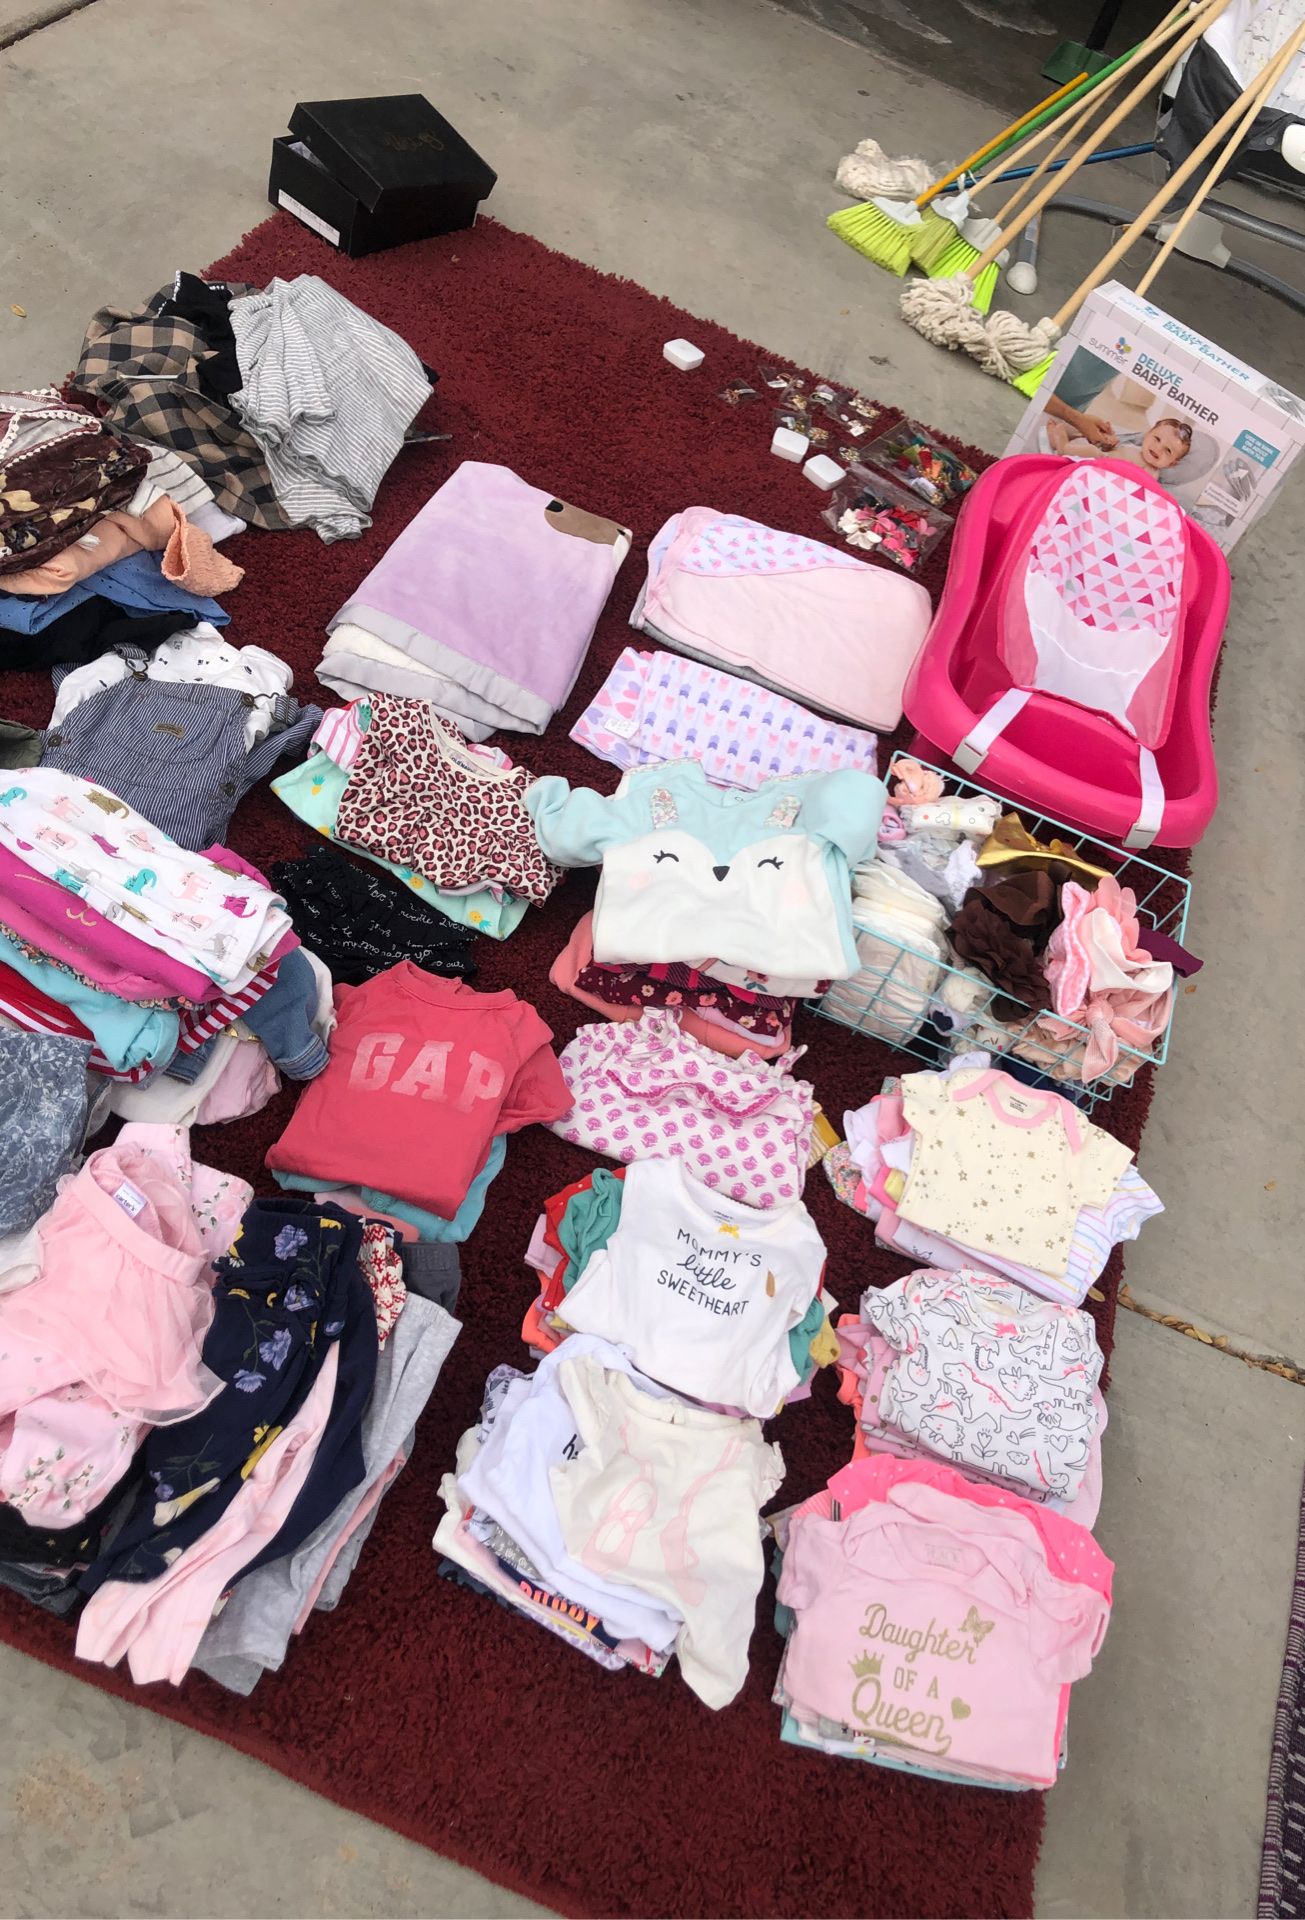 Babygirl clothes